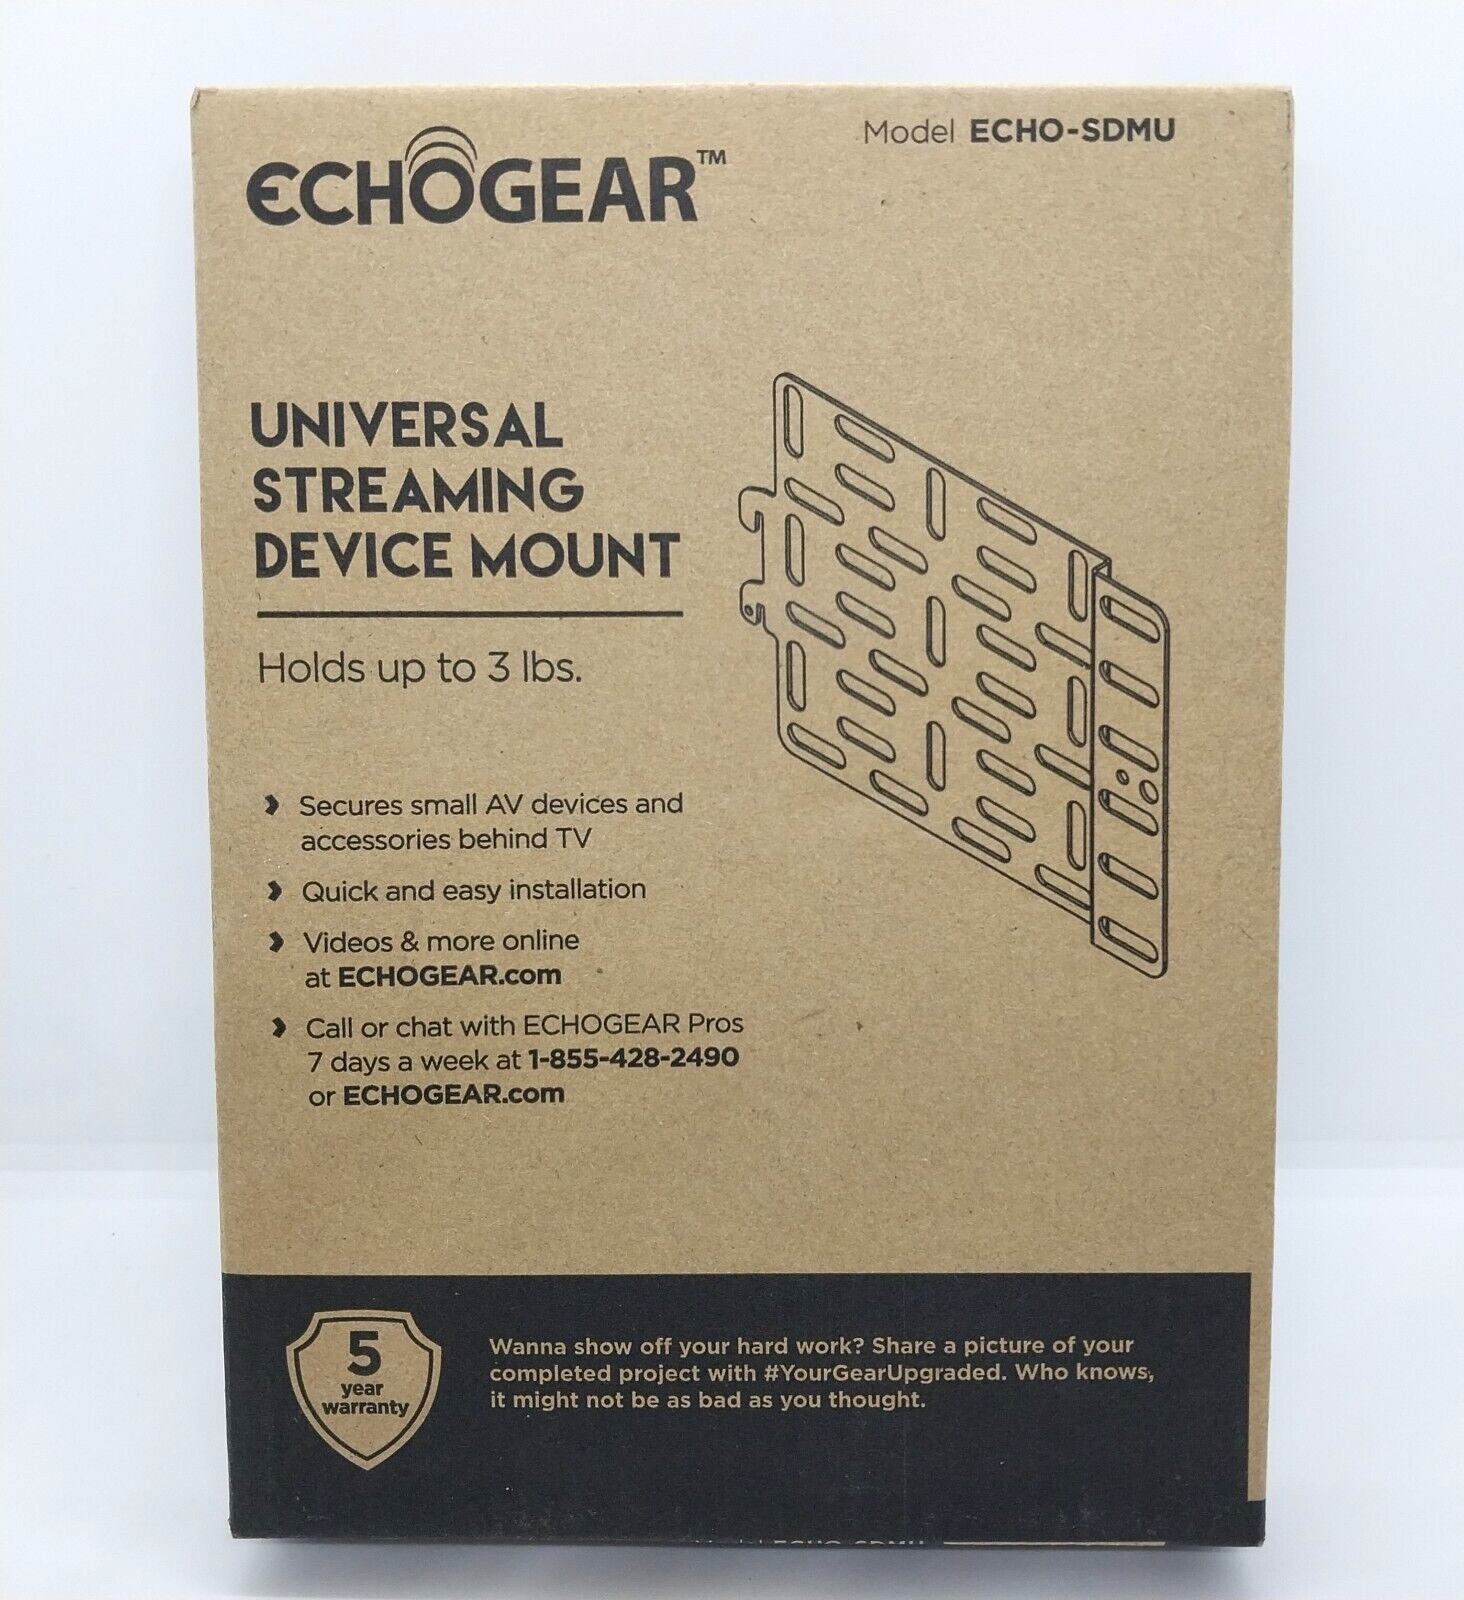 Universal Streaming Device Mount Holds Media Up to 3lbs Securely New Echogear